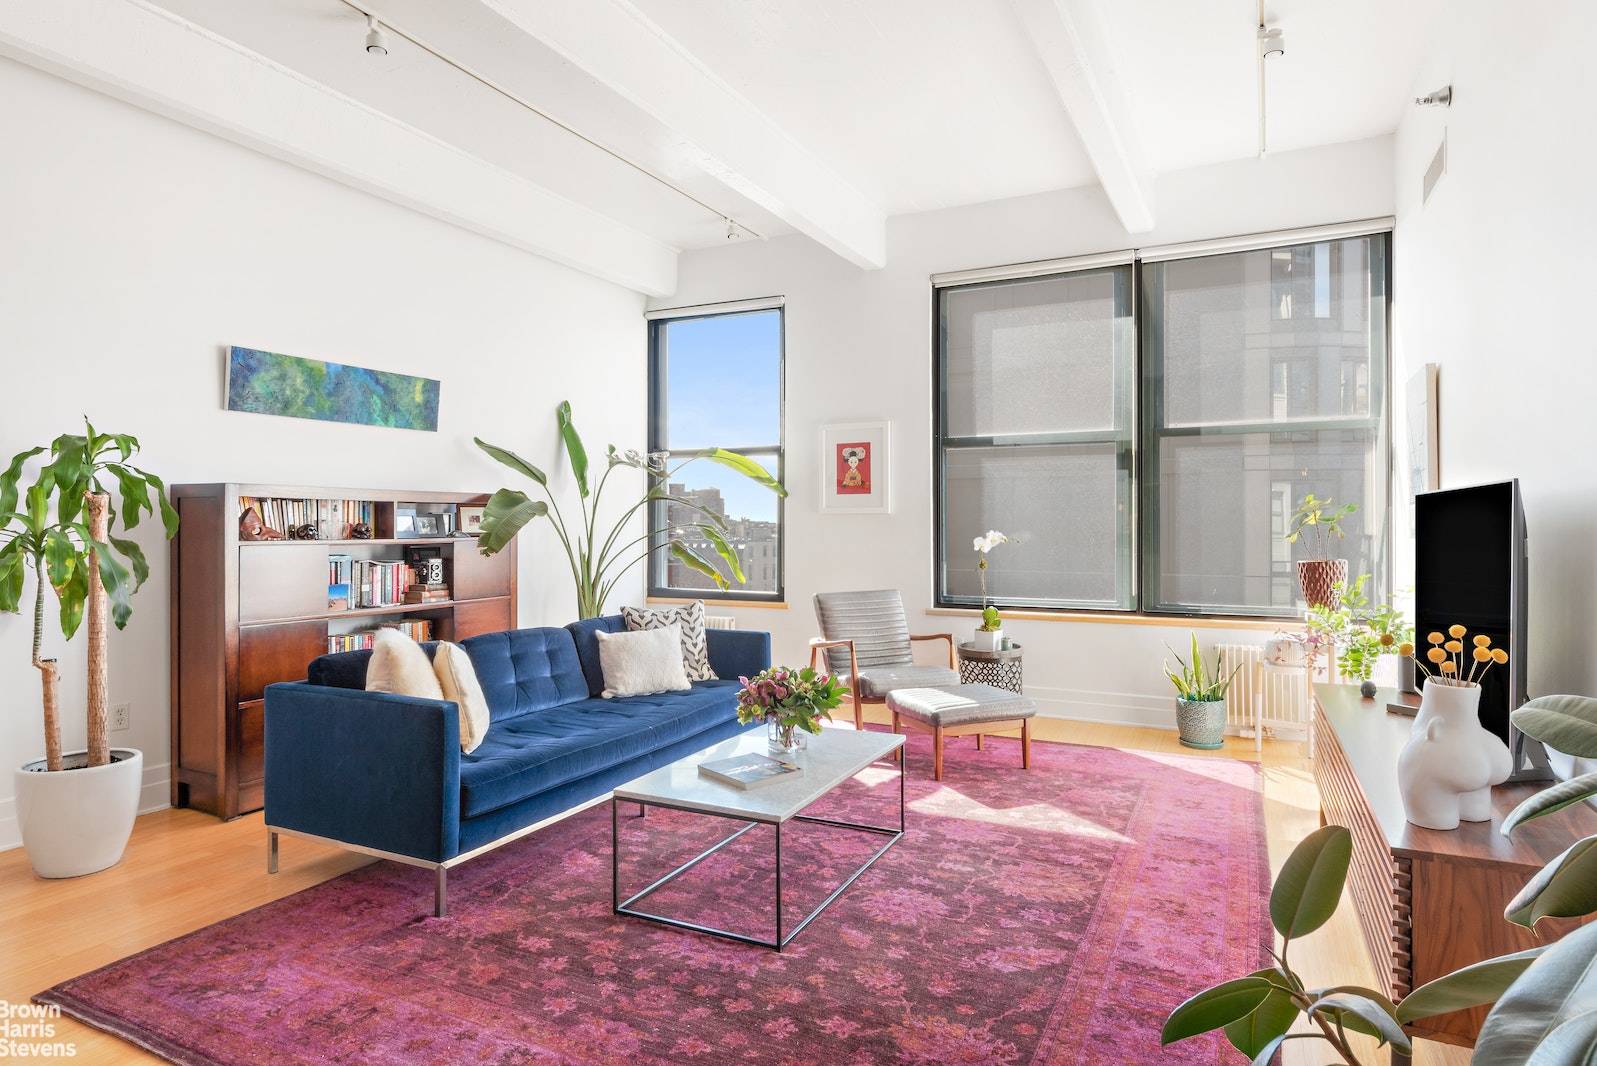 Brimming with high style and fine design, this luxurious 1 bedroom plus home office 2 bathroom loft is a modern gem located in DUMBO's premier full service prewar condominium.